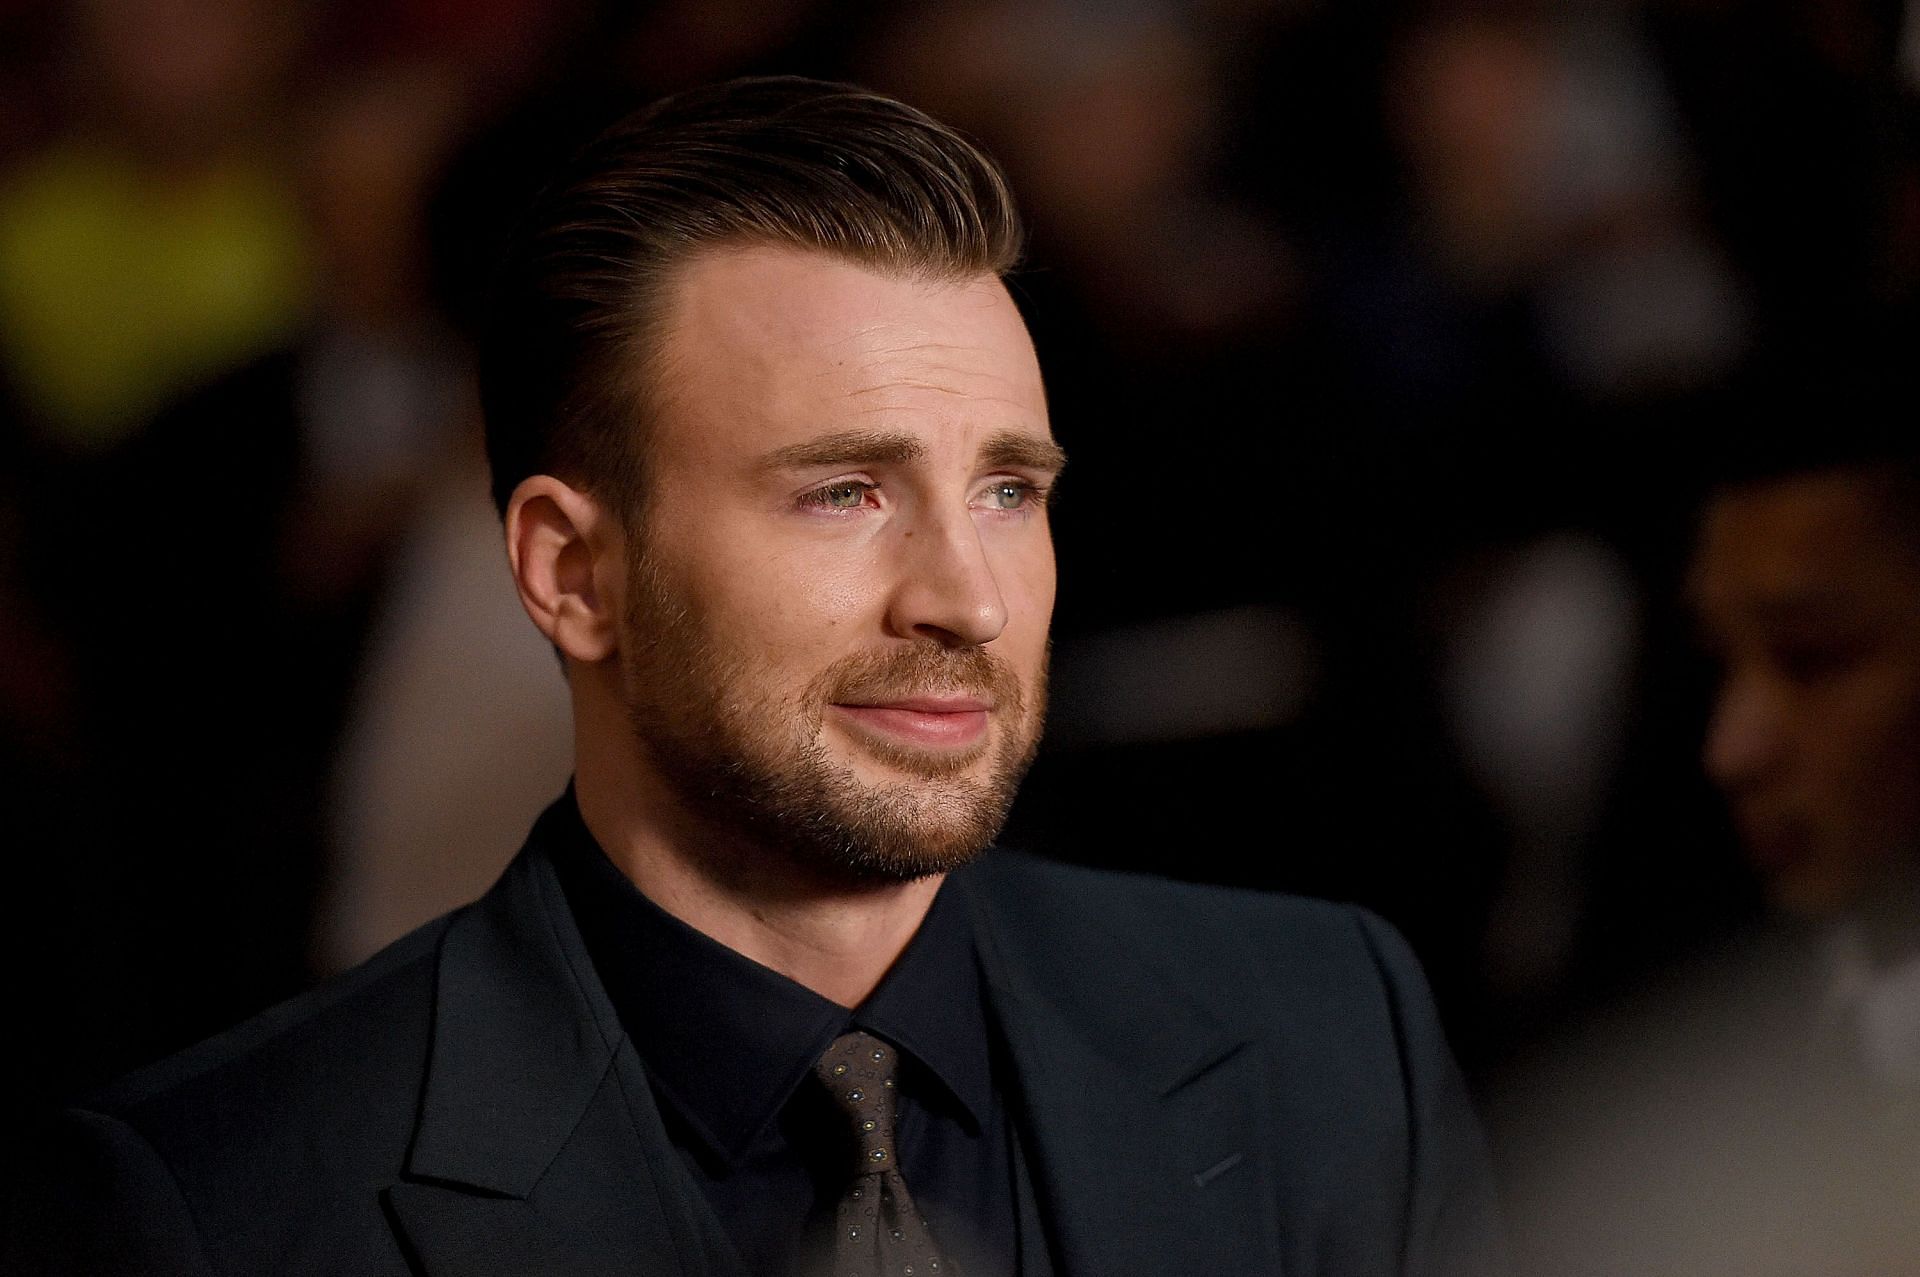 Chris Evans owns some luxurious watches (Image via Getty)